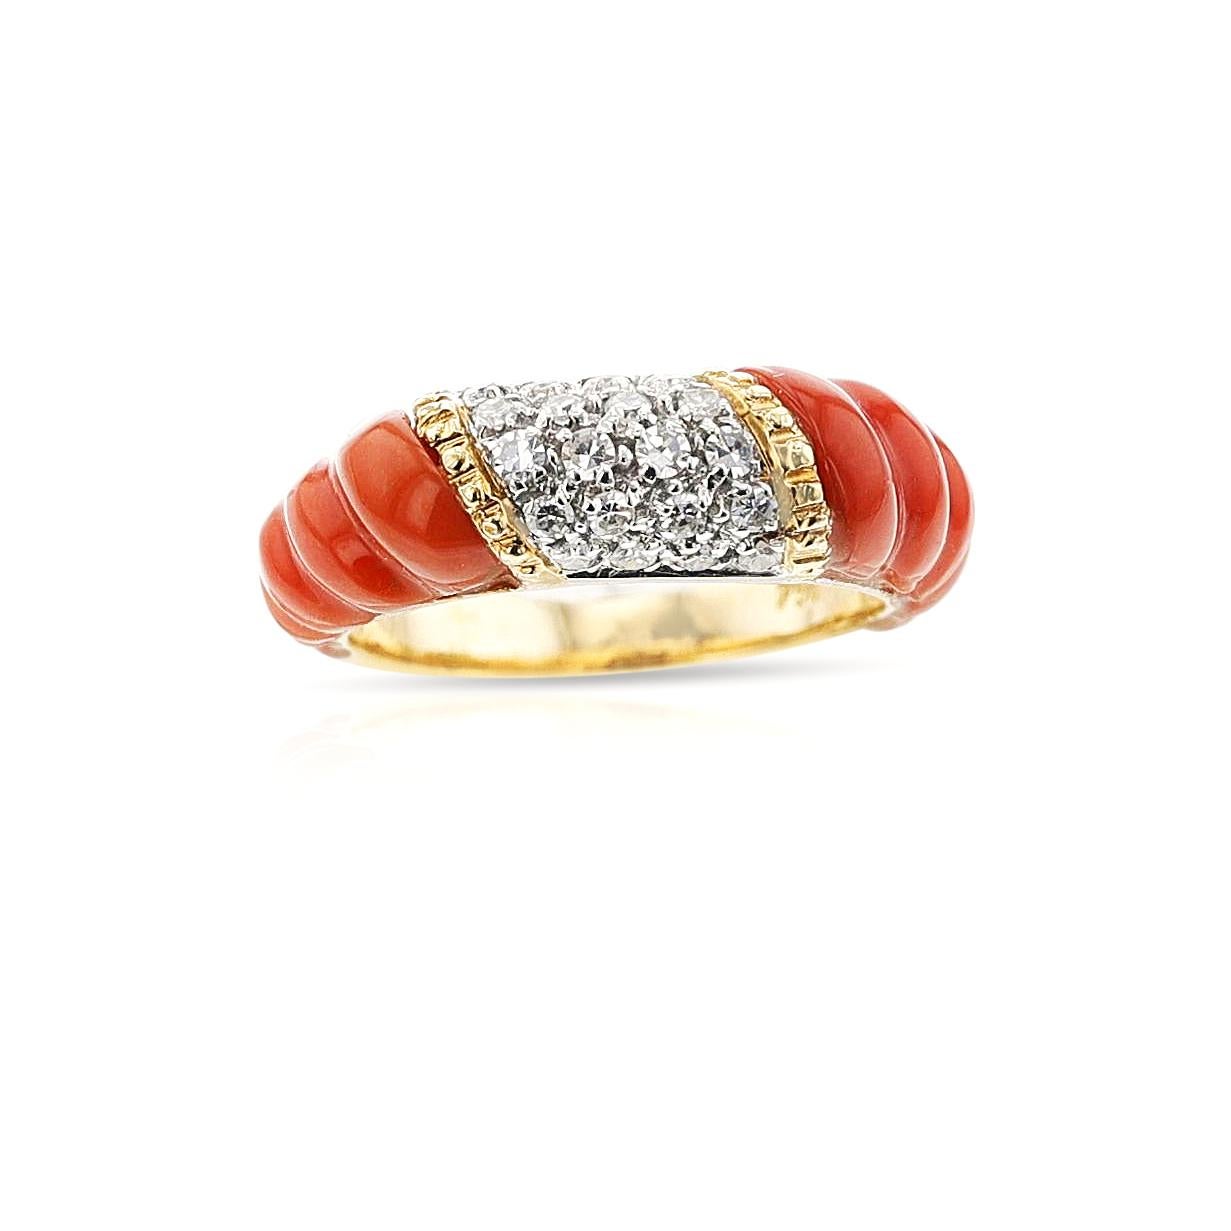 A Diamond and Twisted Coral Gold Ring made in 18k Yellow Gold. Ring Size US 5.50.  The total weight of the ring is 4.93 grams.


SKU: 1114-CJARTYU